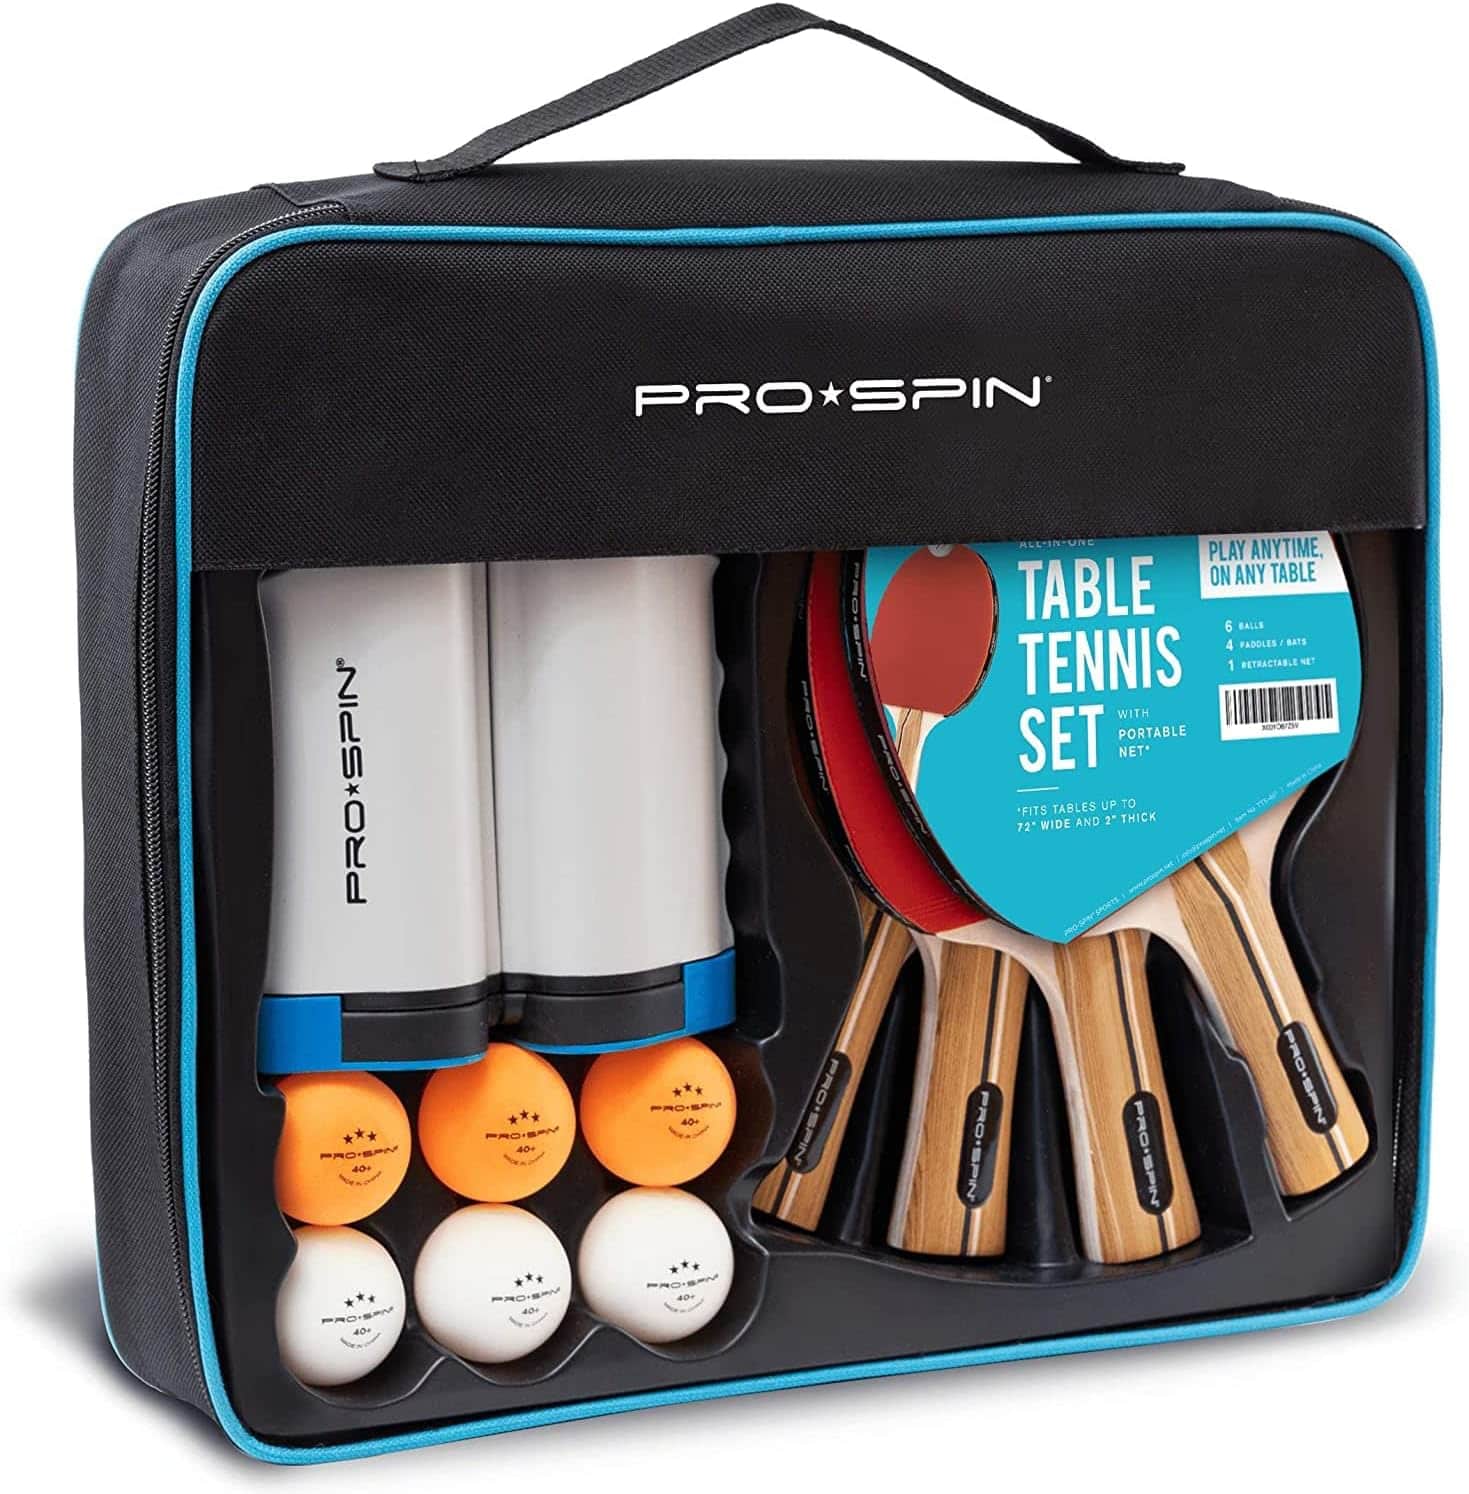 ProSpin table tennis